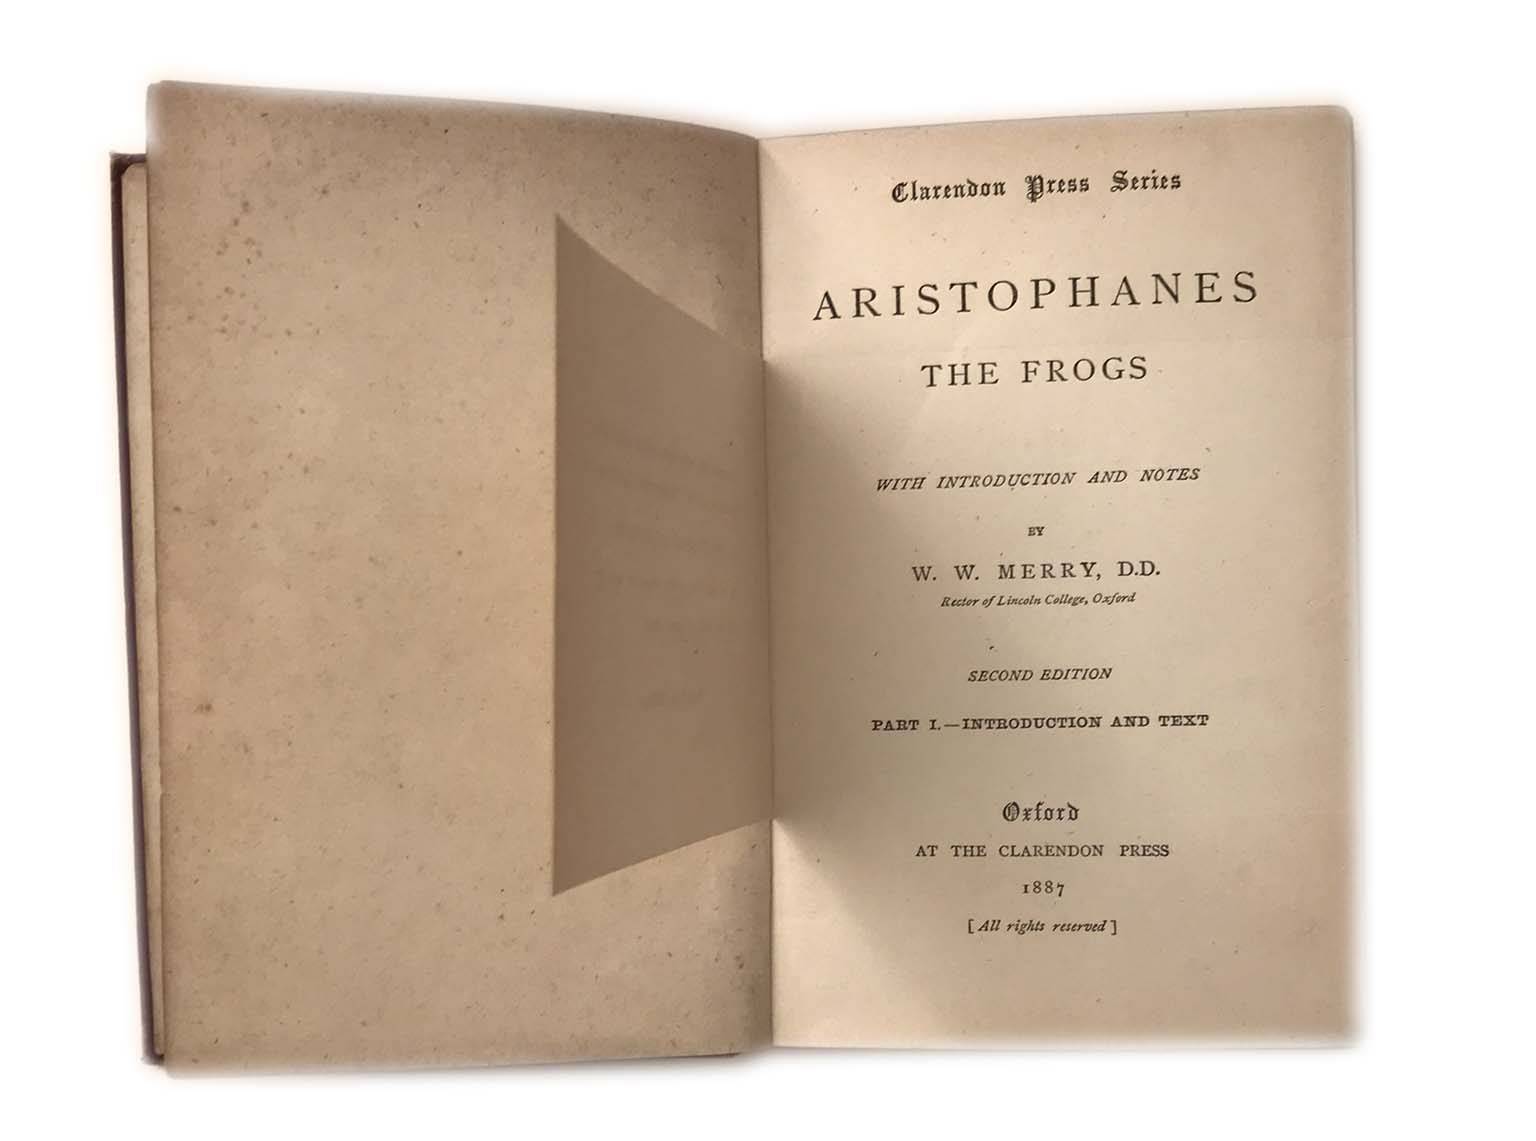 ARISTOPHANES THE FROGS